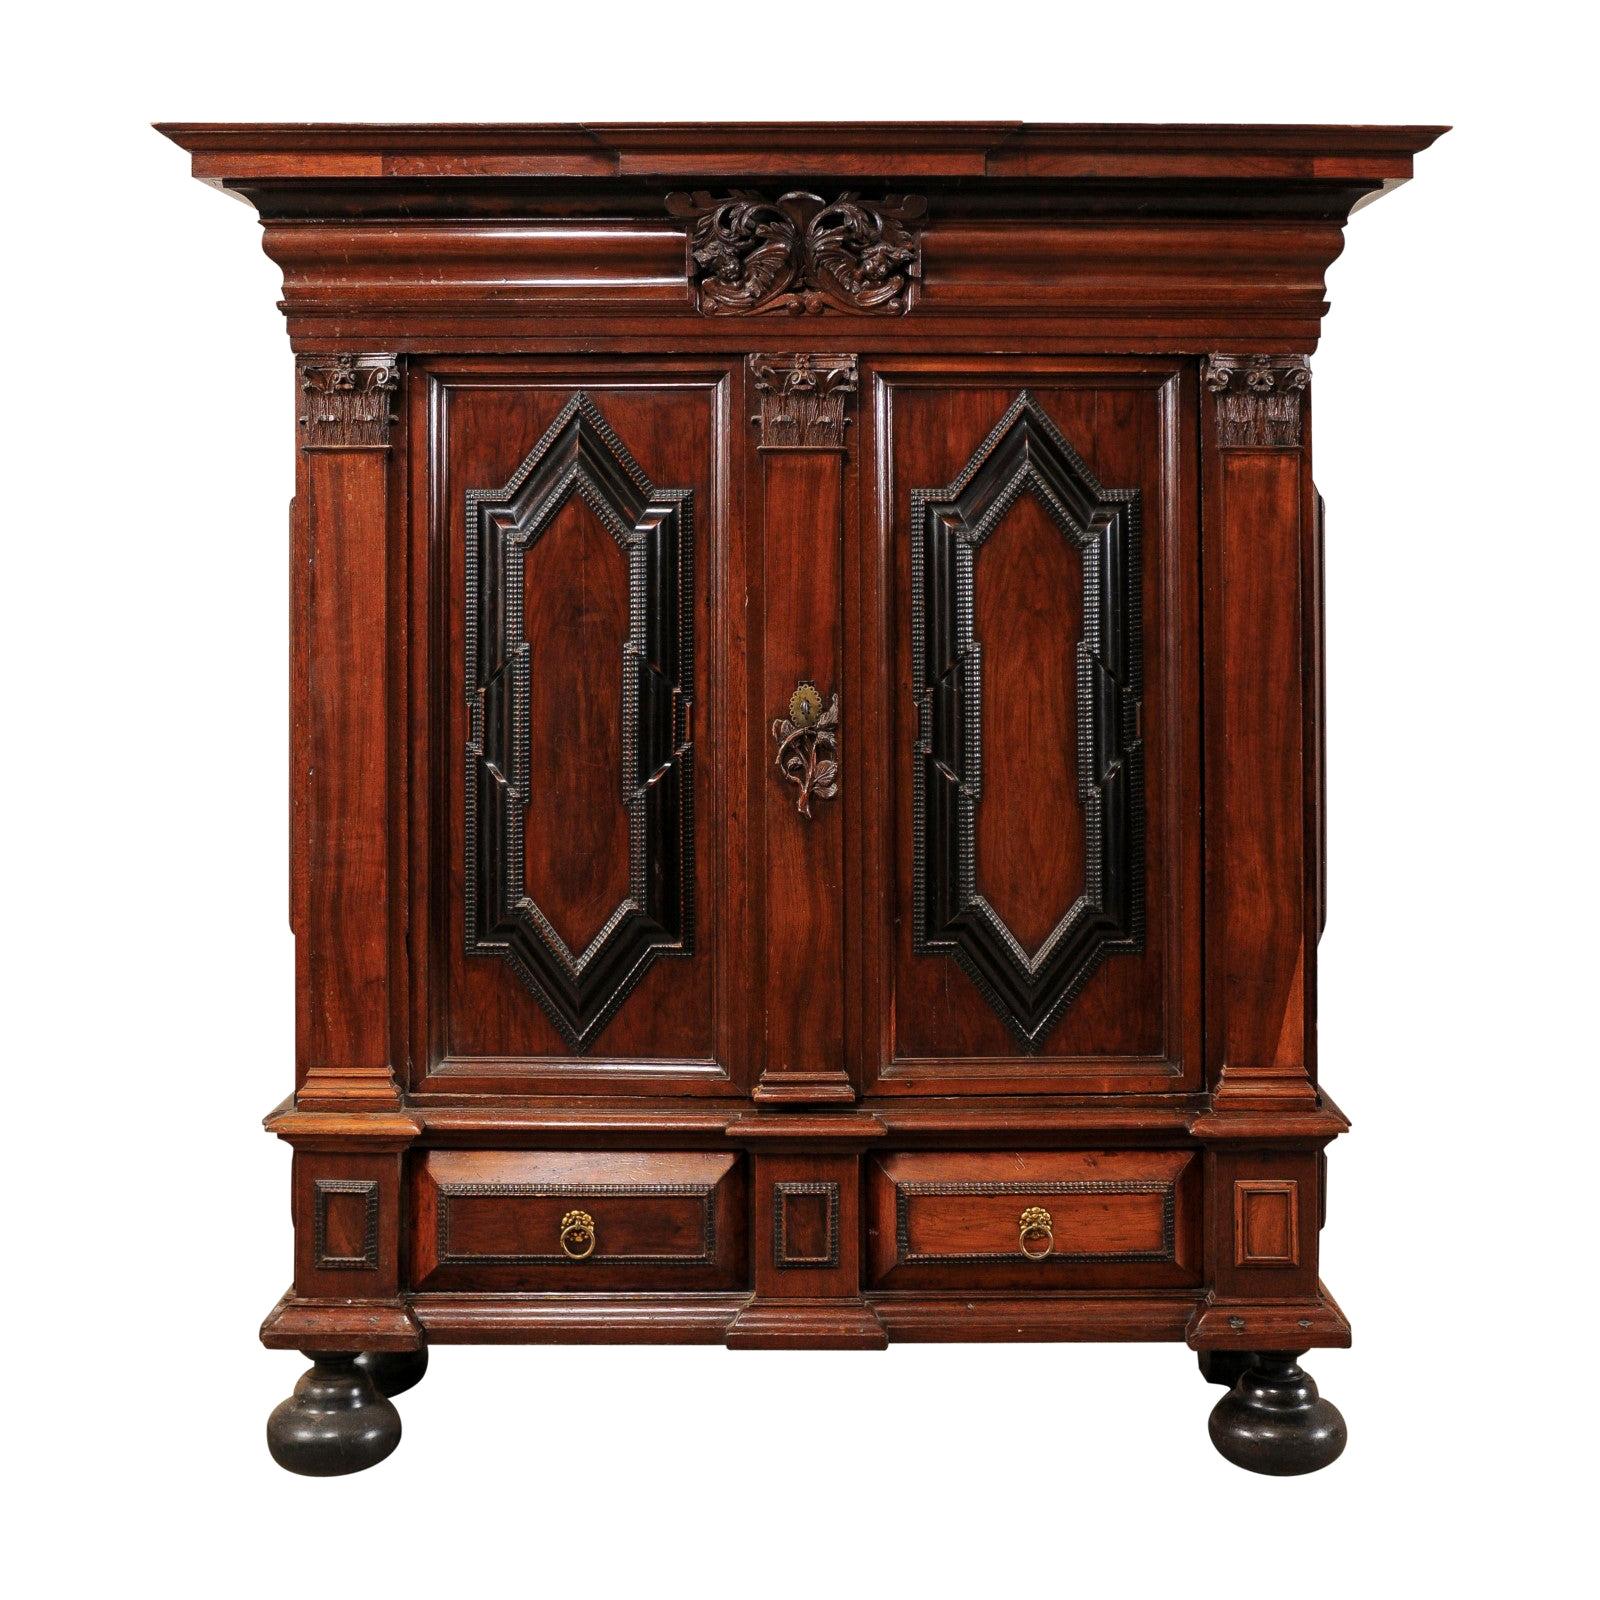 An Early 18th Century Swedish Period Baroque Kas Cabinet with Ebonized Accents